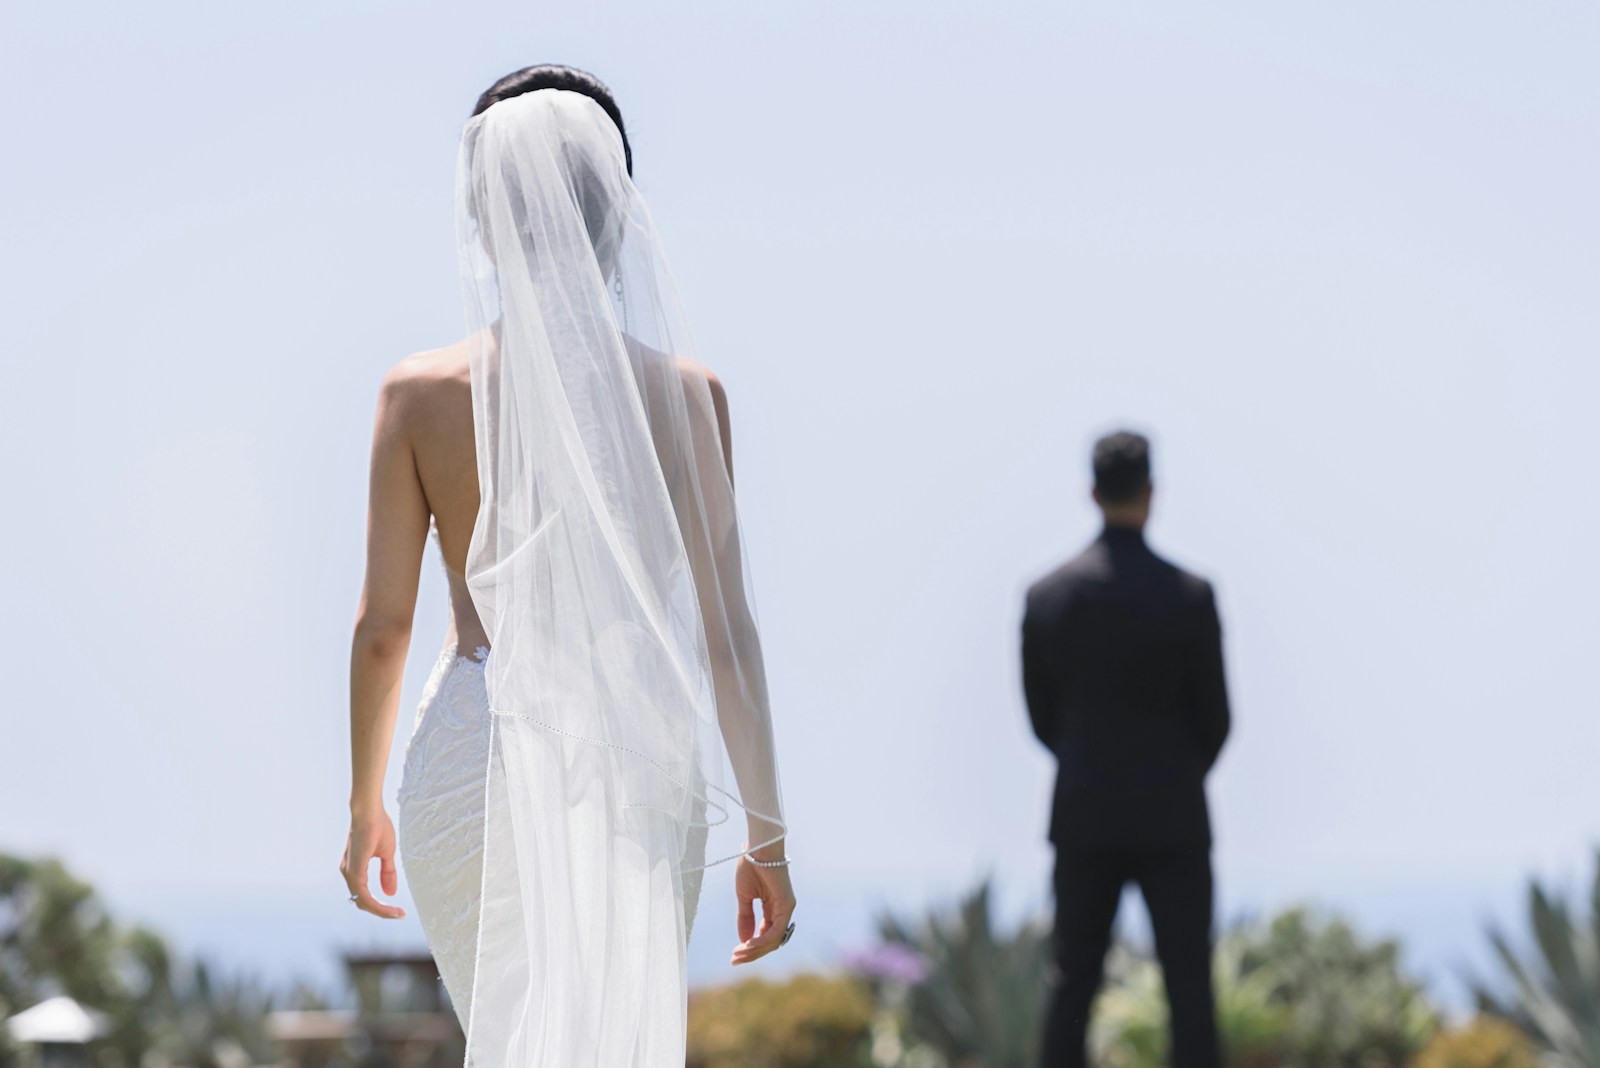 a woman in a wedding dress standing next to a man in a suit